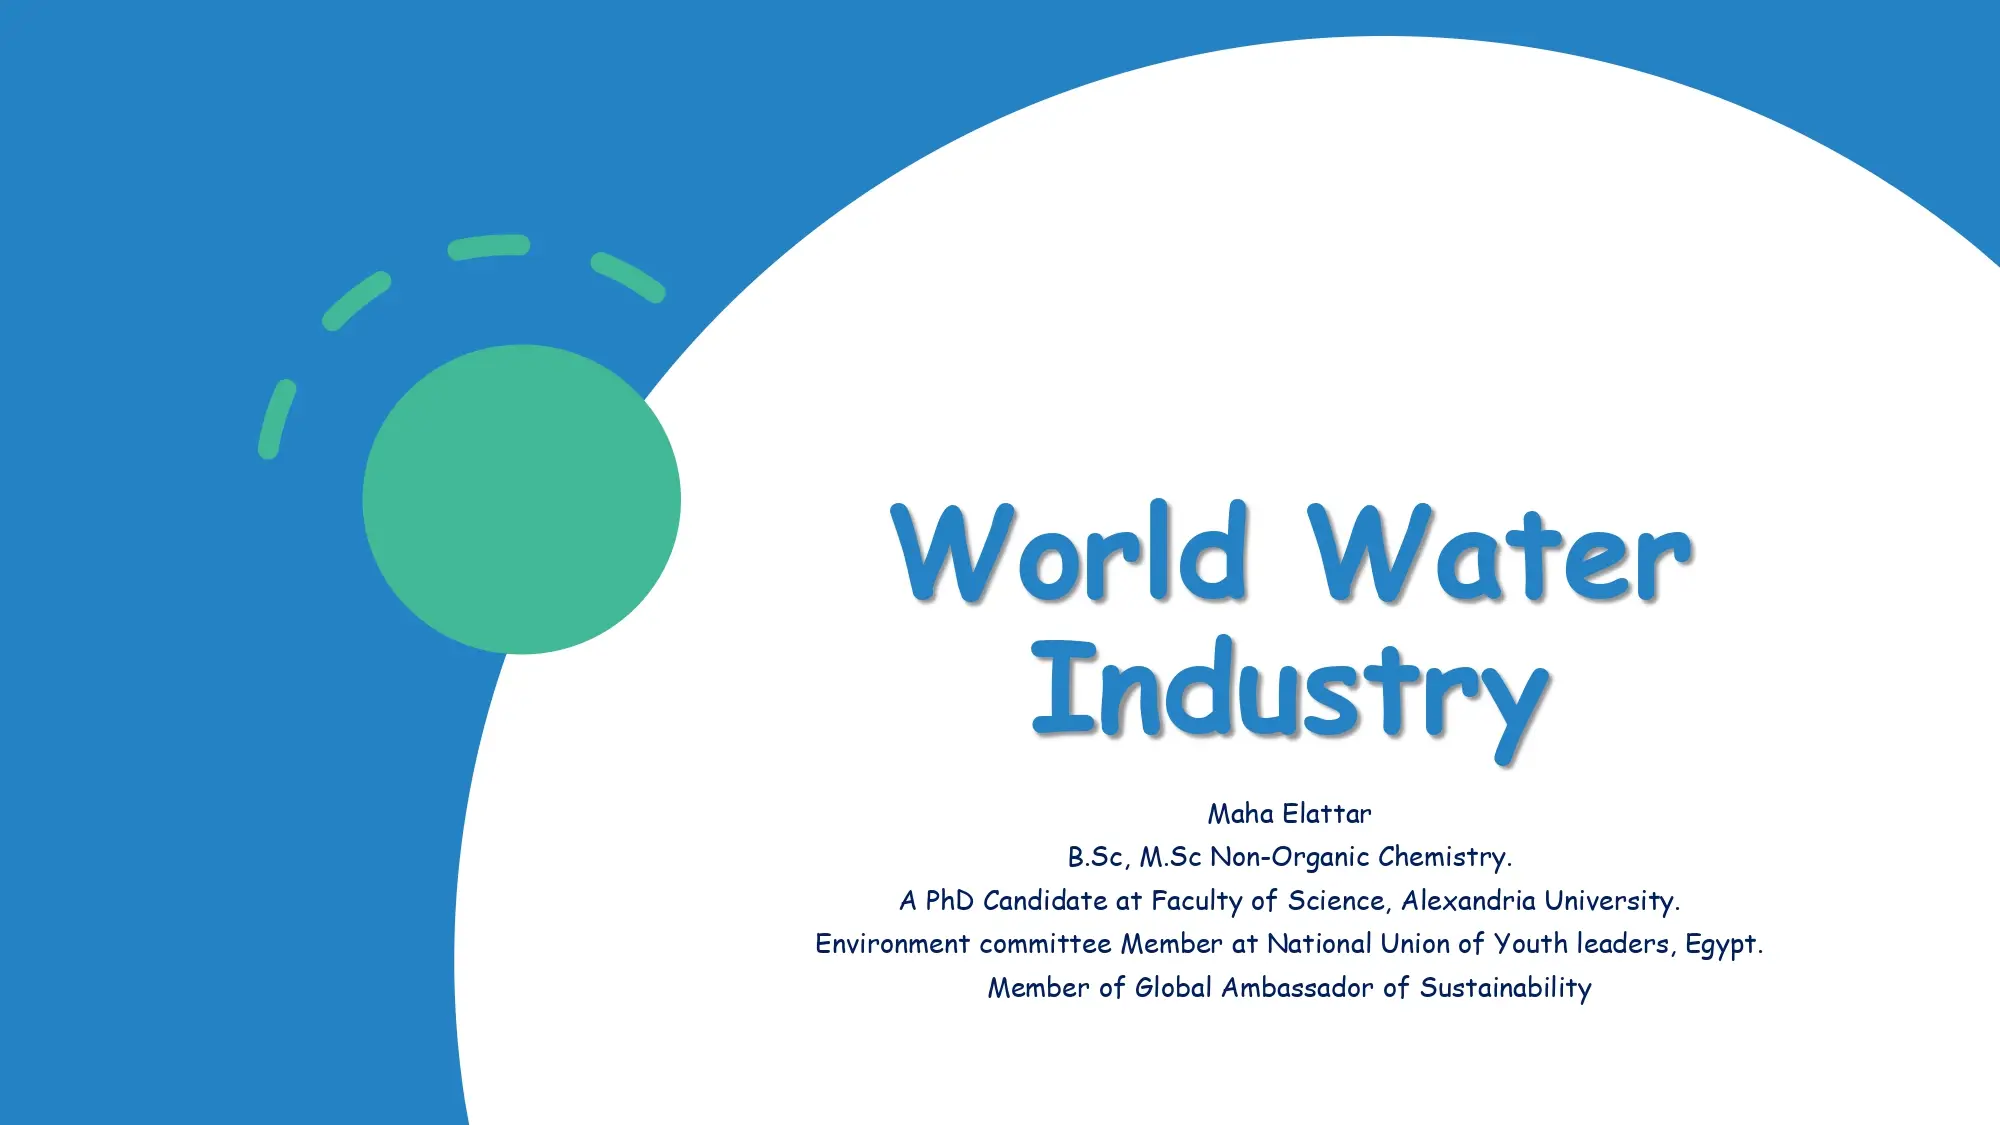 World Water Industry